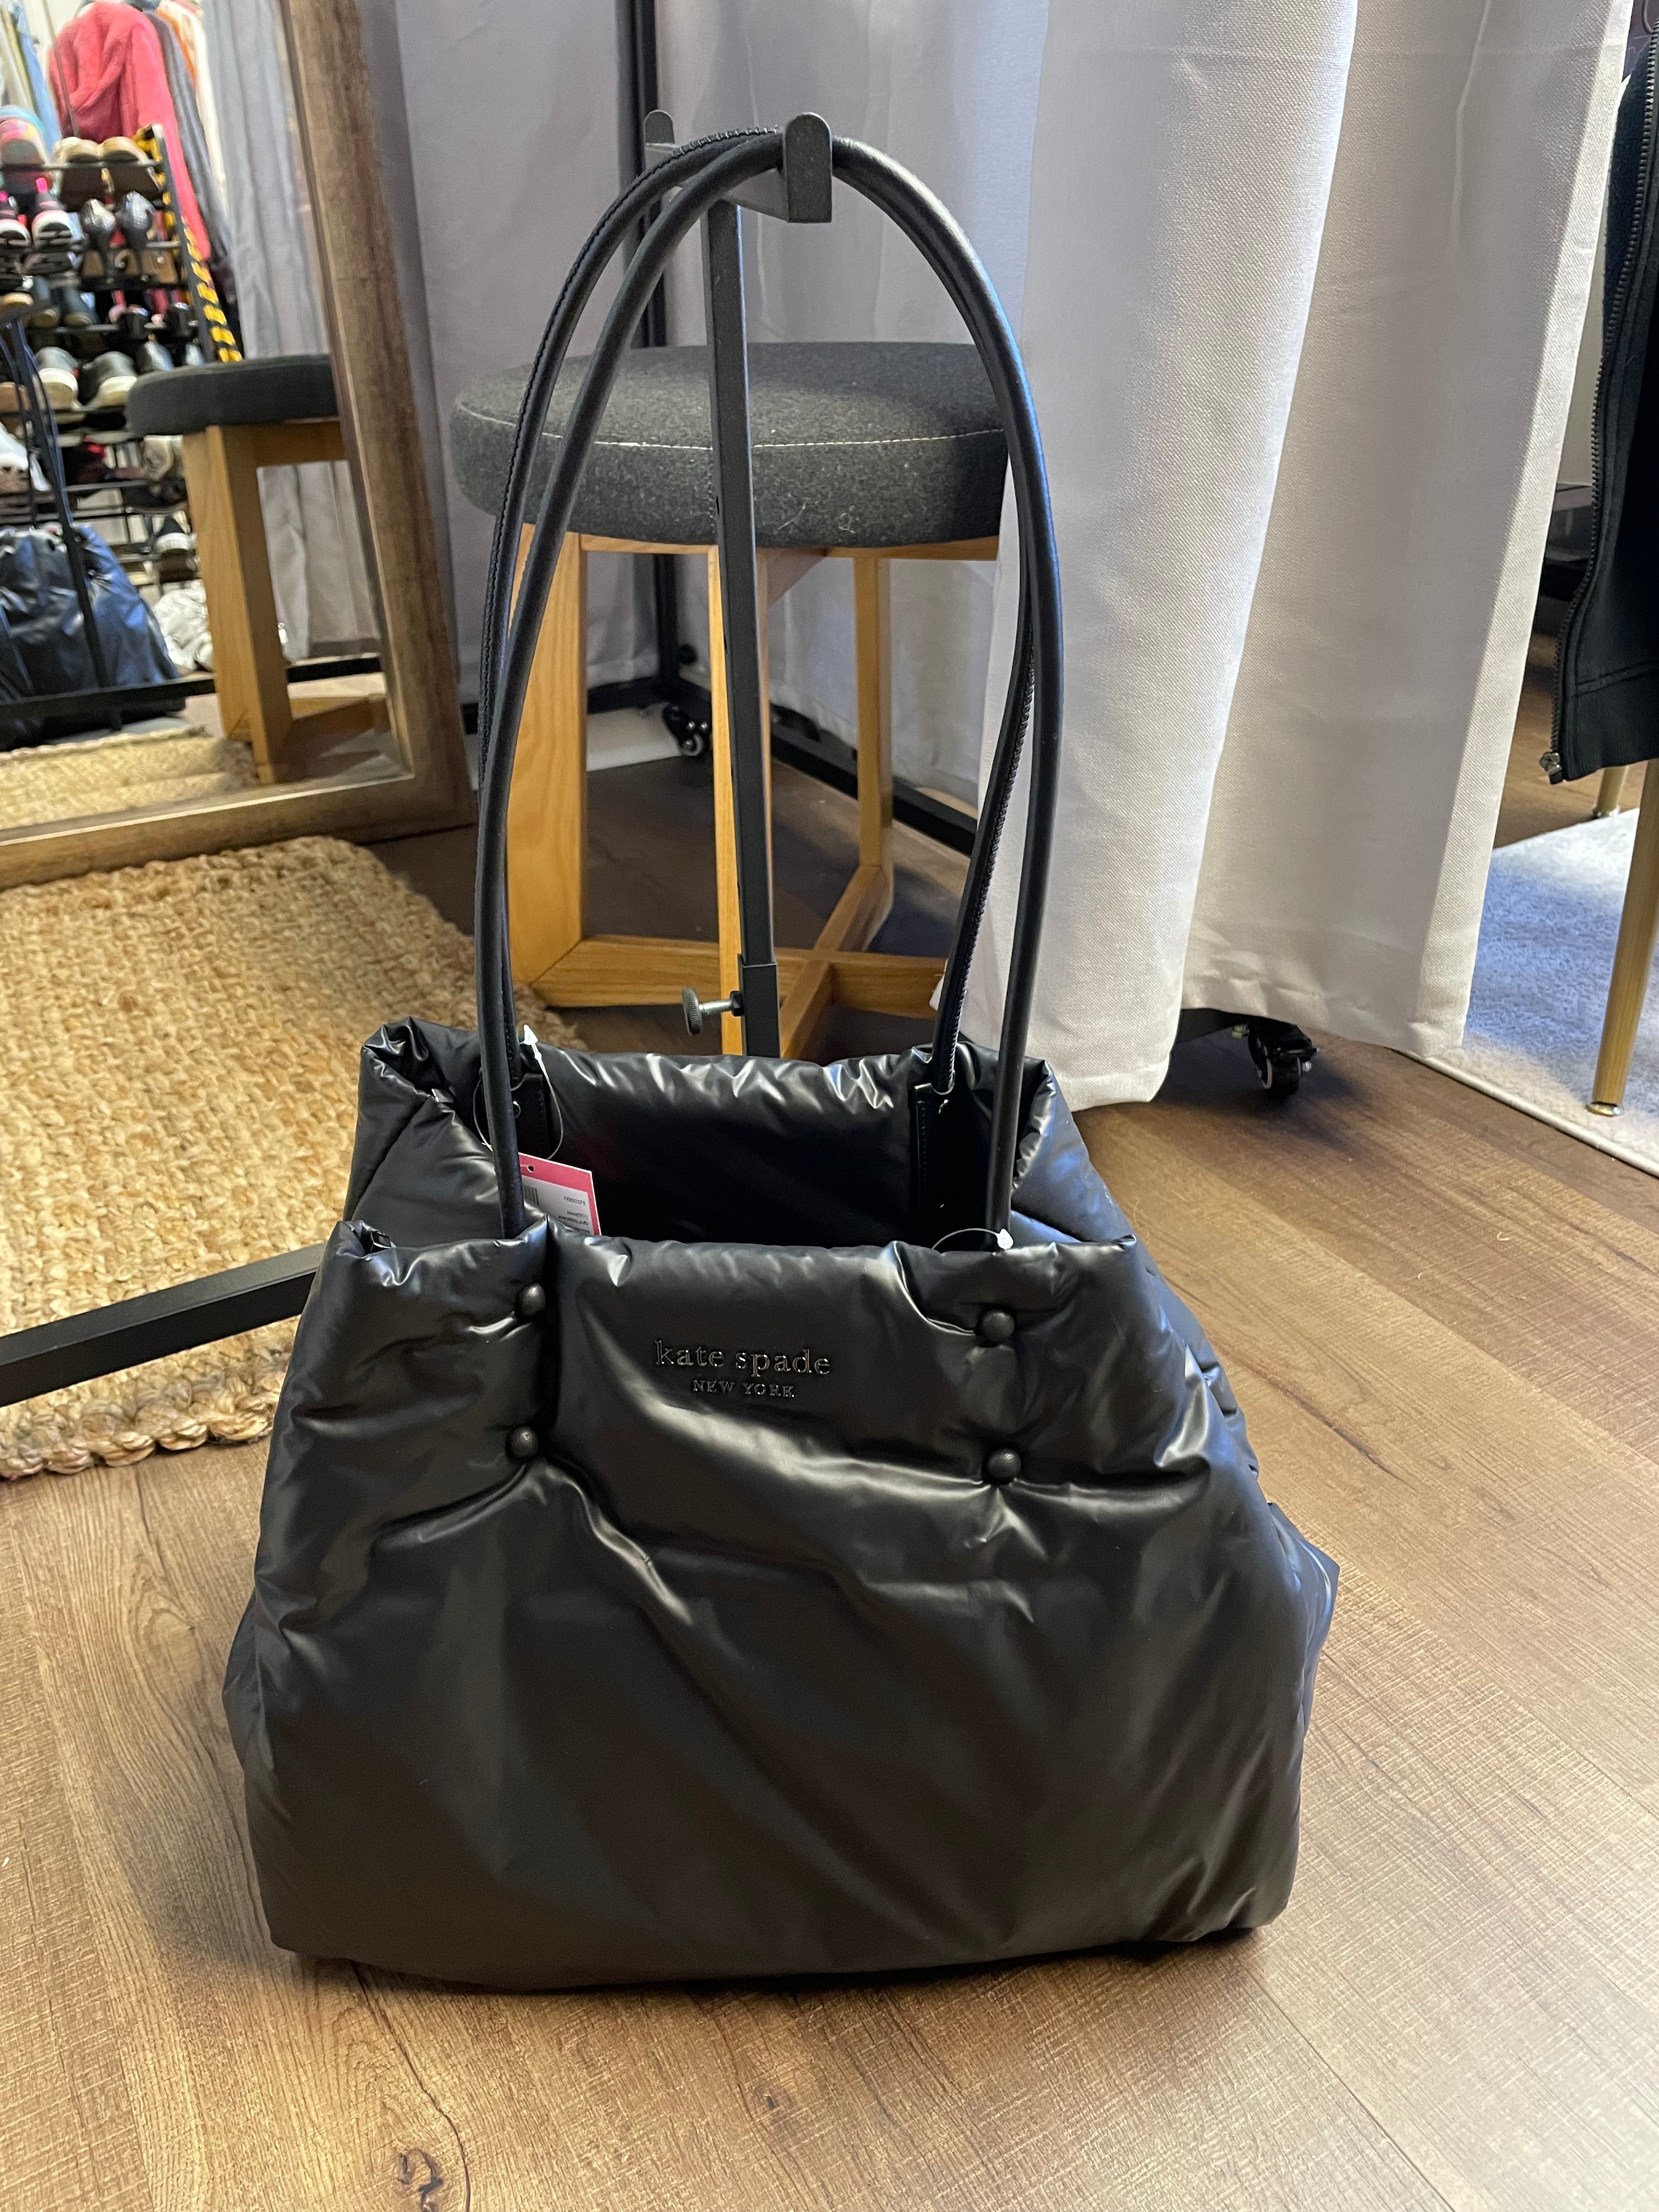 Kate Spade Everything Puffy Large Tote